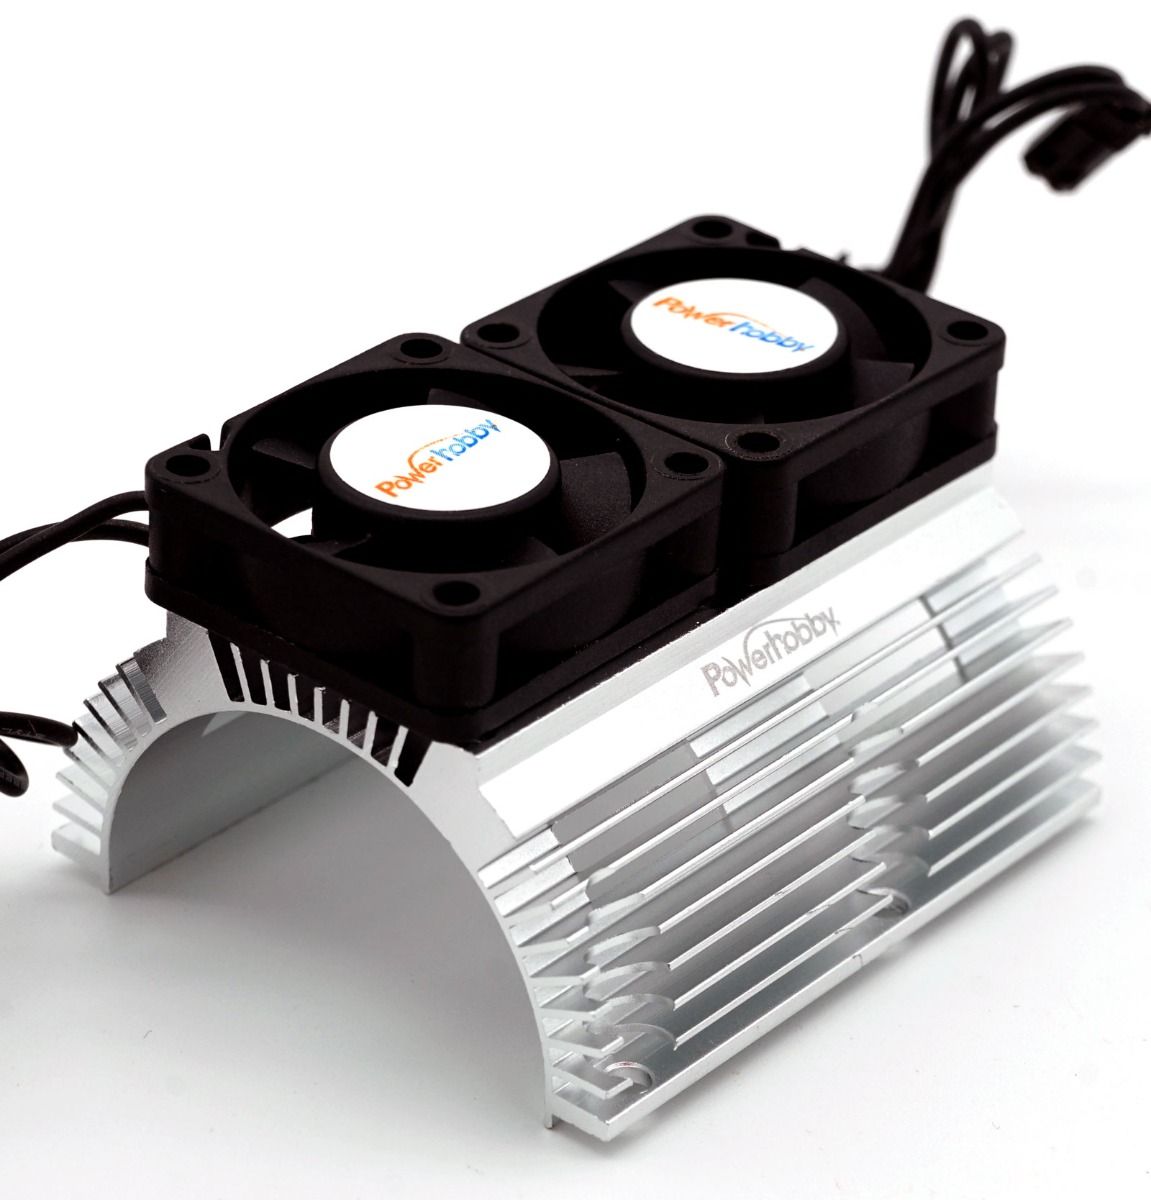 Power Hobby Heat Sink with Twin Turbo High Speed Cooling Fans (Assorted Colors)